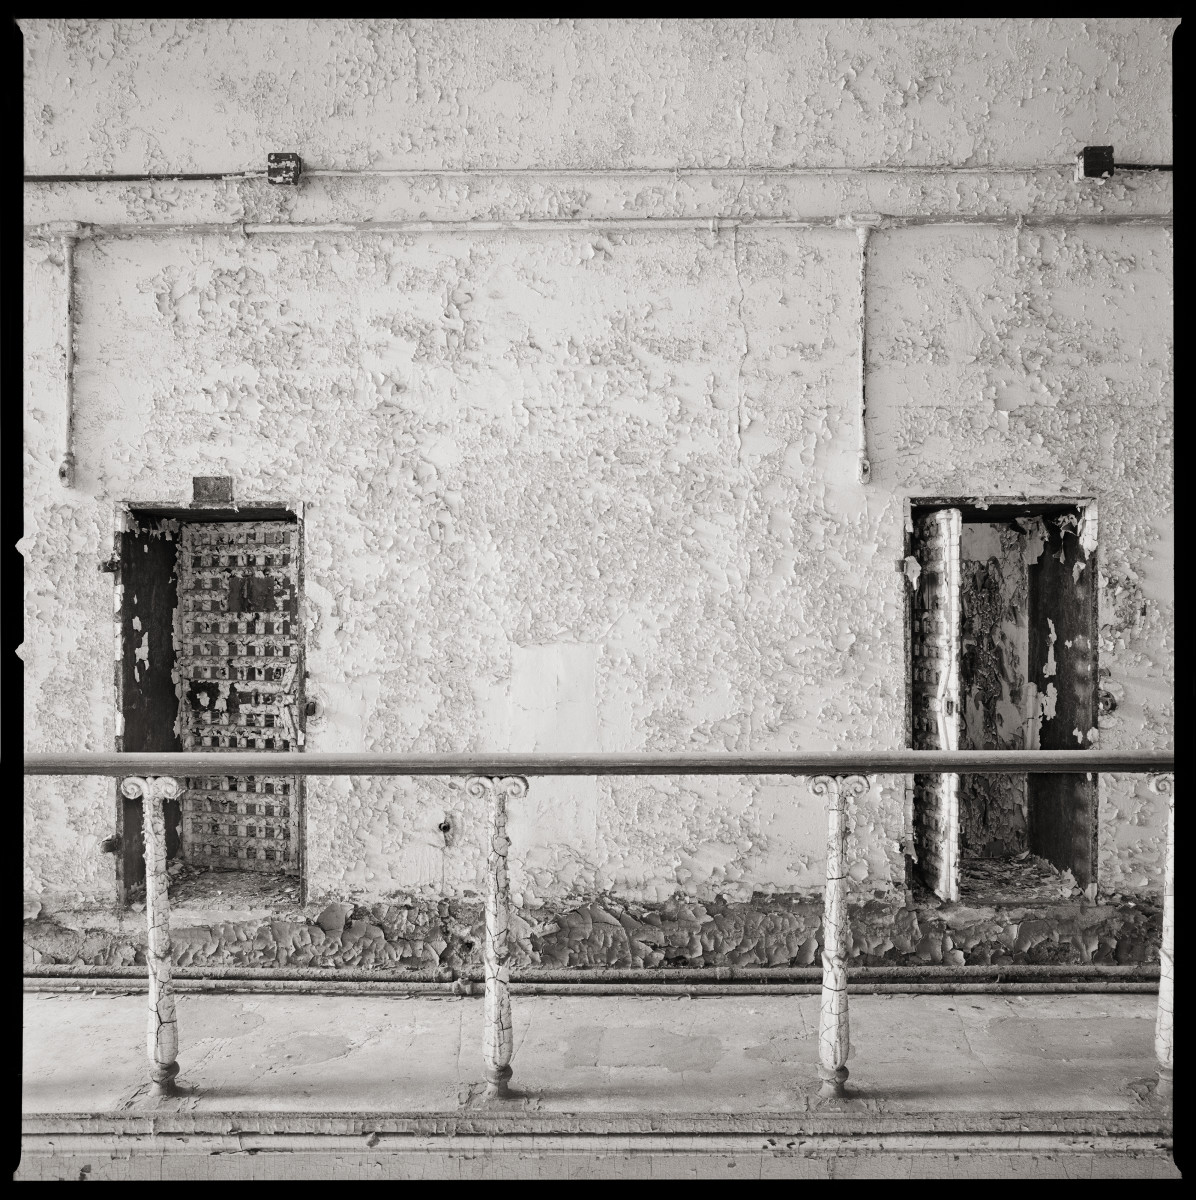 Serenity by Eric T. Kunsman  Image: ID: A black and white image shows a wall with two doors next to each other.  There is a metal bar in front of the doors.  The wall around the doors has chipping paint.